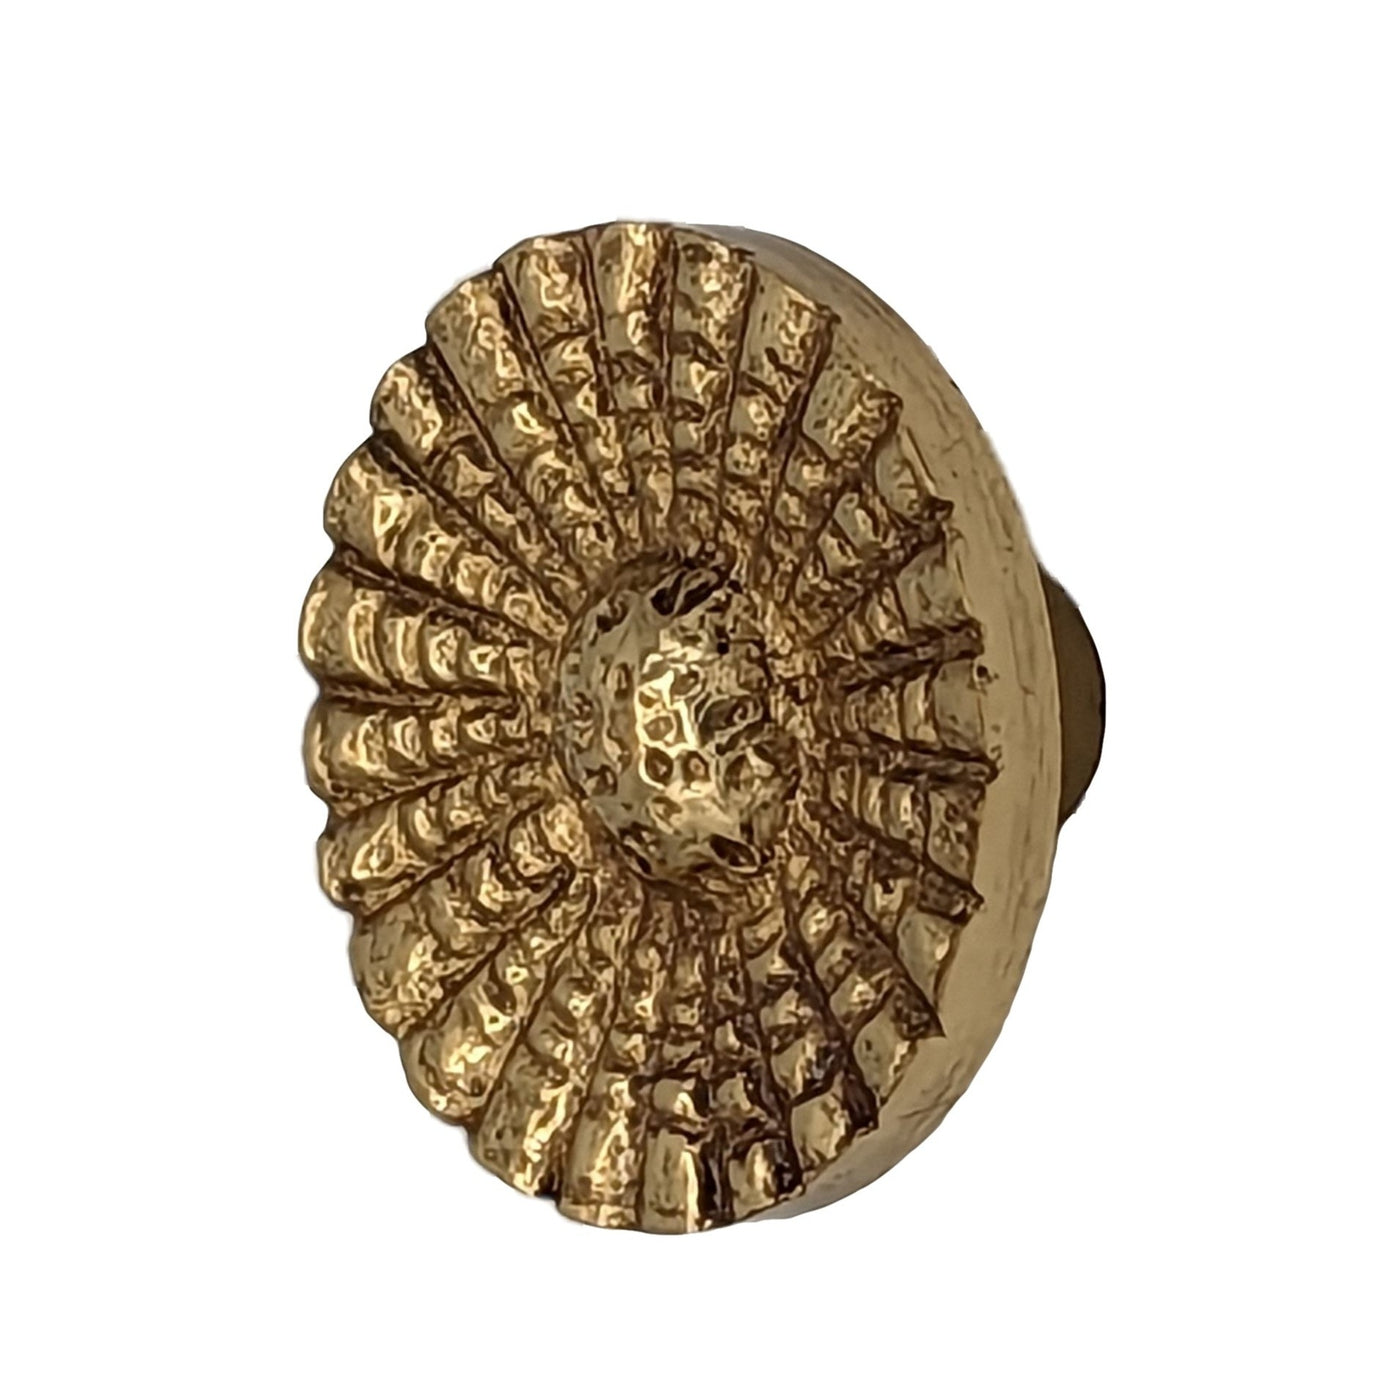 1 Inch Solid Brass Art Deco Style Round Cabinet and Furniture Knob